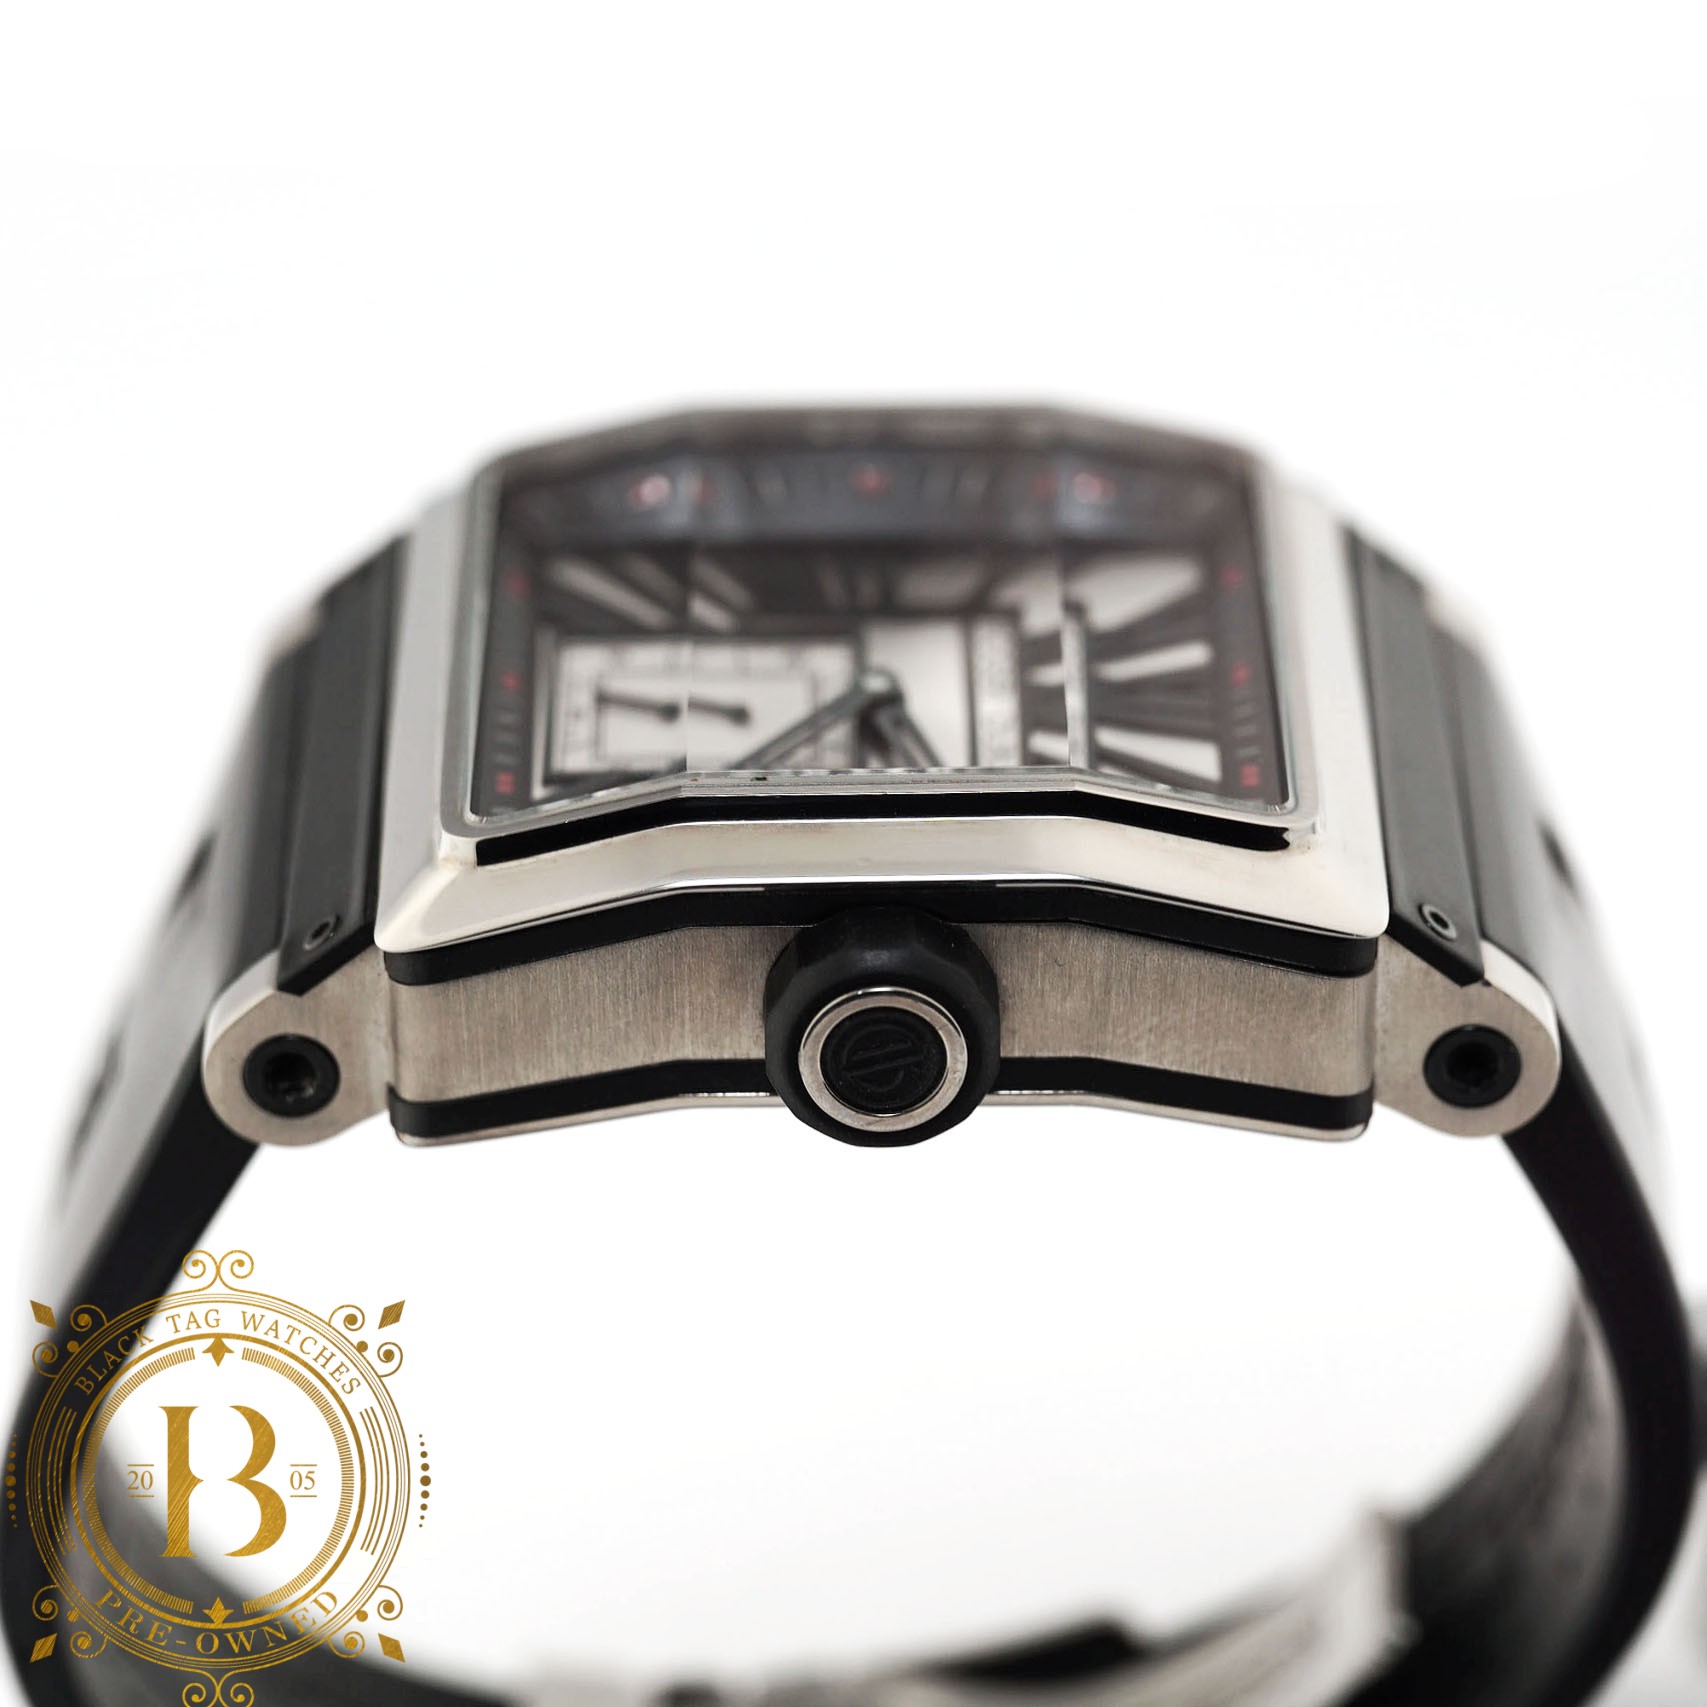 Roger Dubuis King Square Titanium Watch KS40-821-71-00/03R01/A for $12,000  • Black Tag Watches Pre-Owned